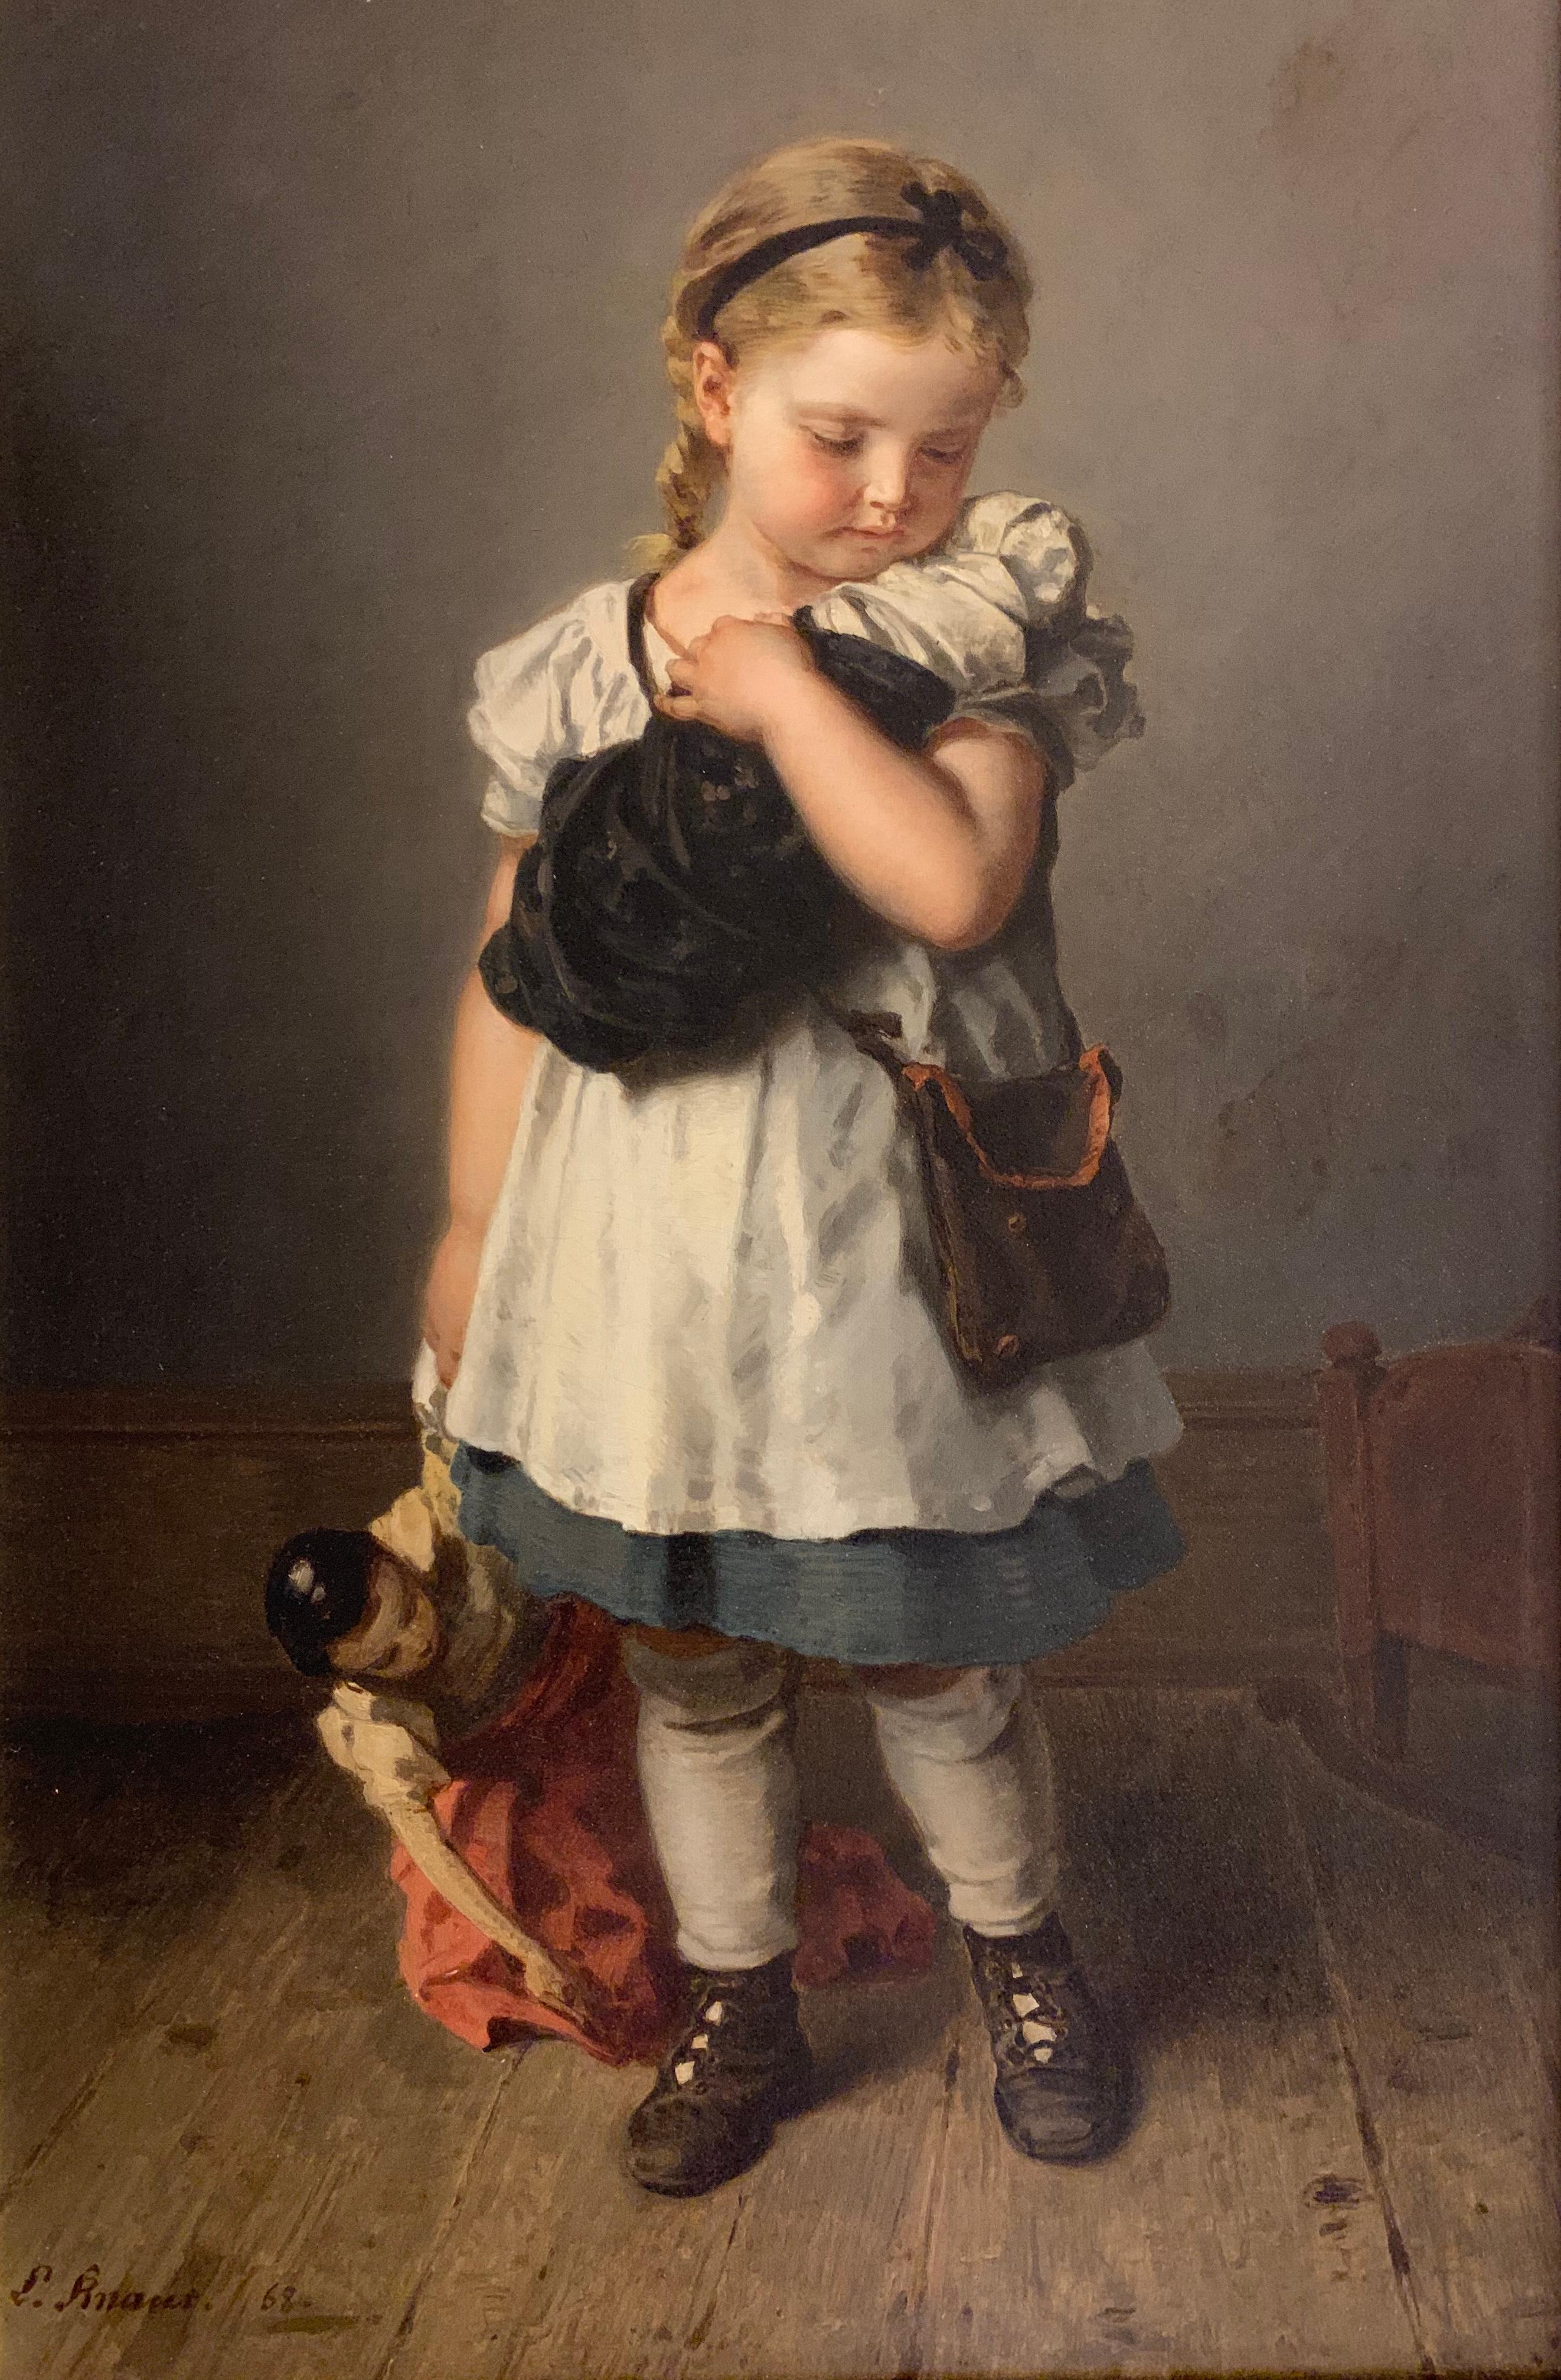 Child with Doll - Painting by Ludwig Knaus 